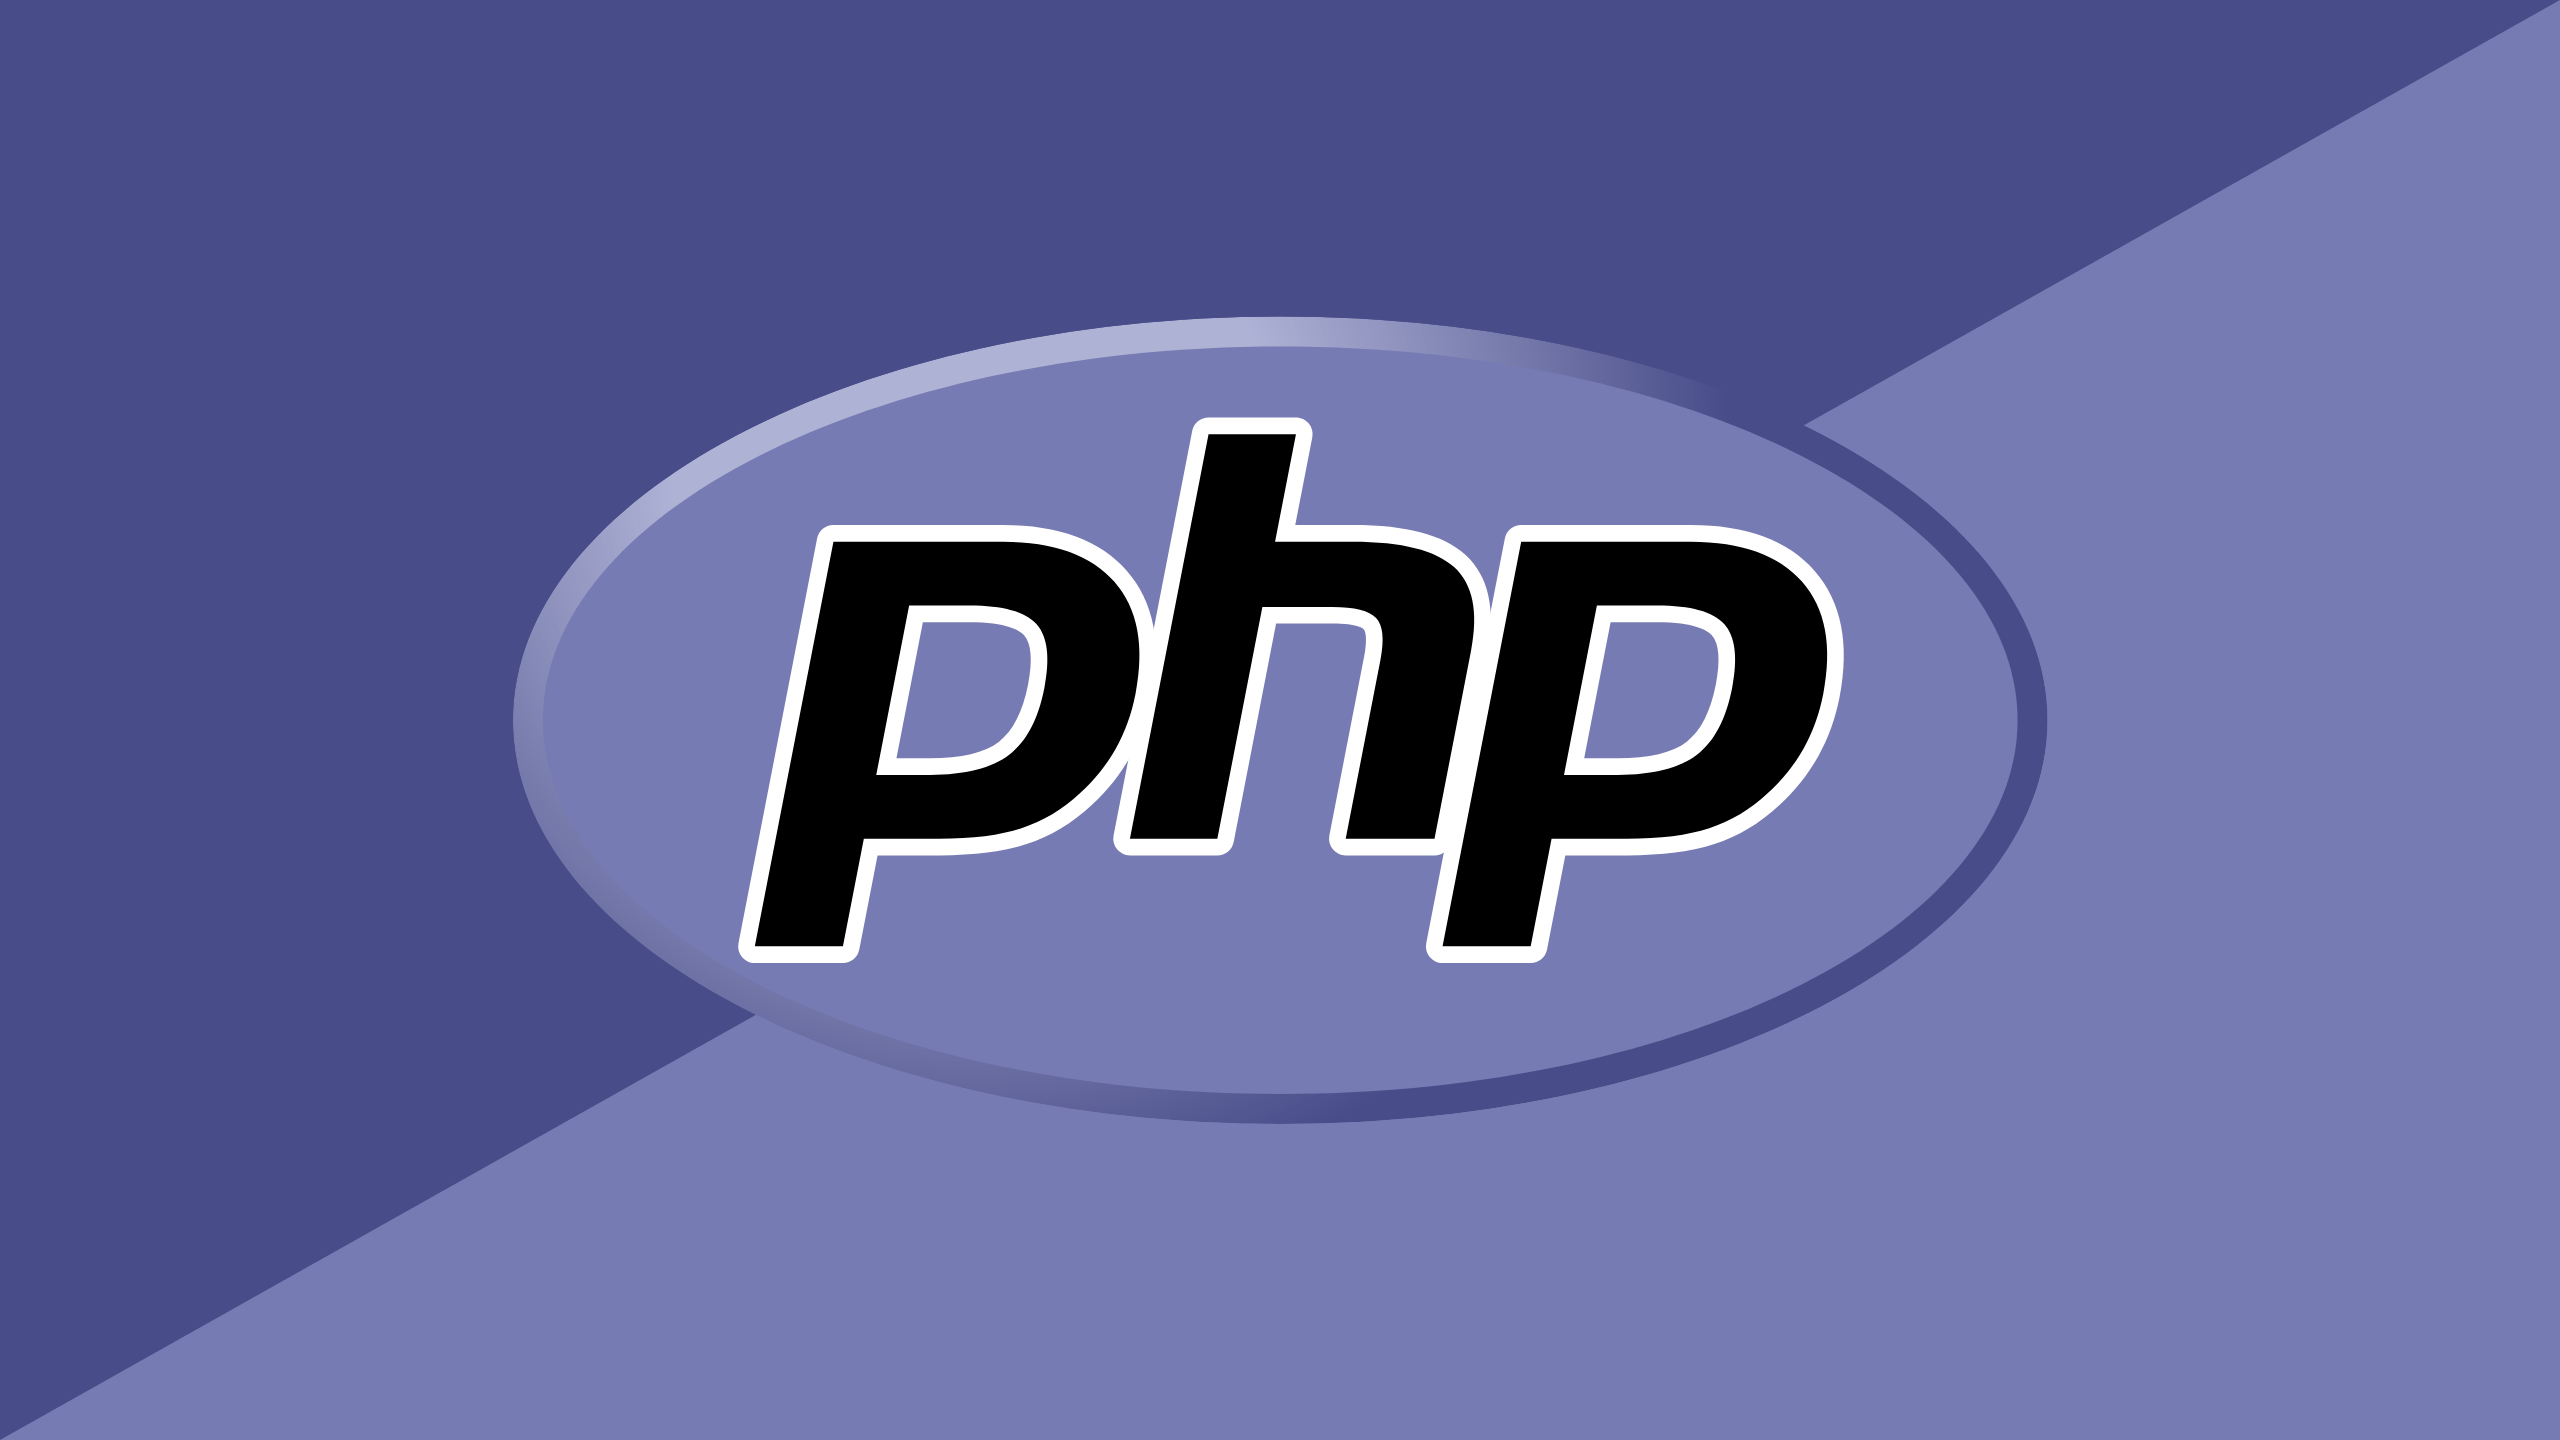 Is PHP still relevant to build websites in 2023? Benefits and trends